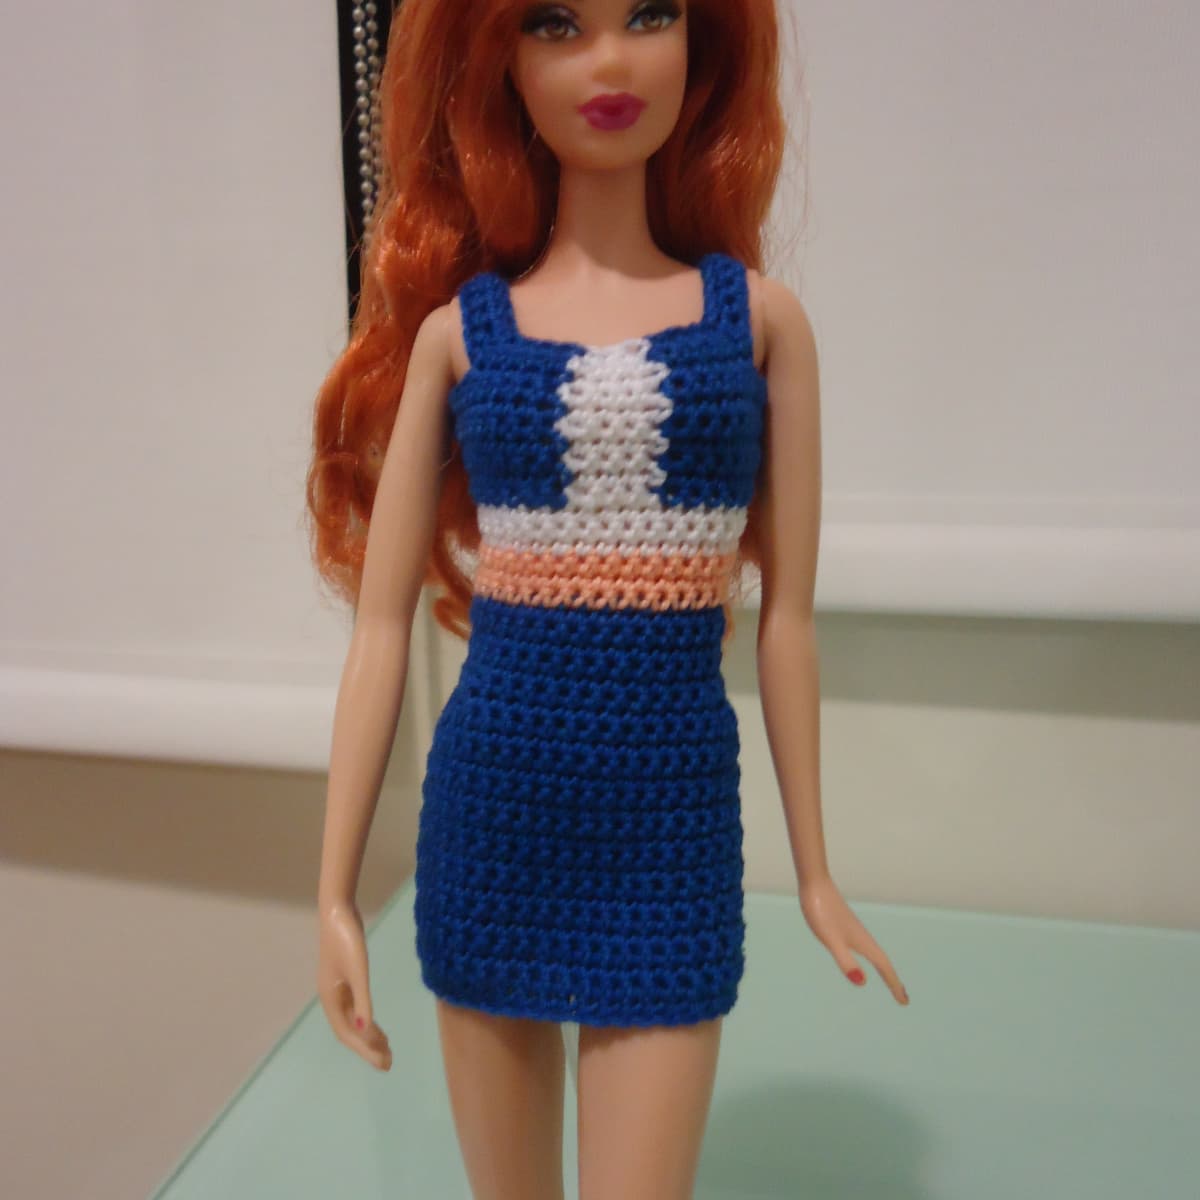 How to Make No-Sew Doll Clothes for Barbies and More! - FeltMagnet